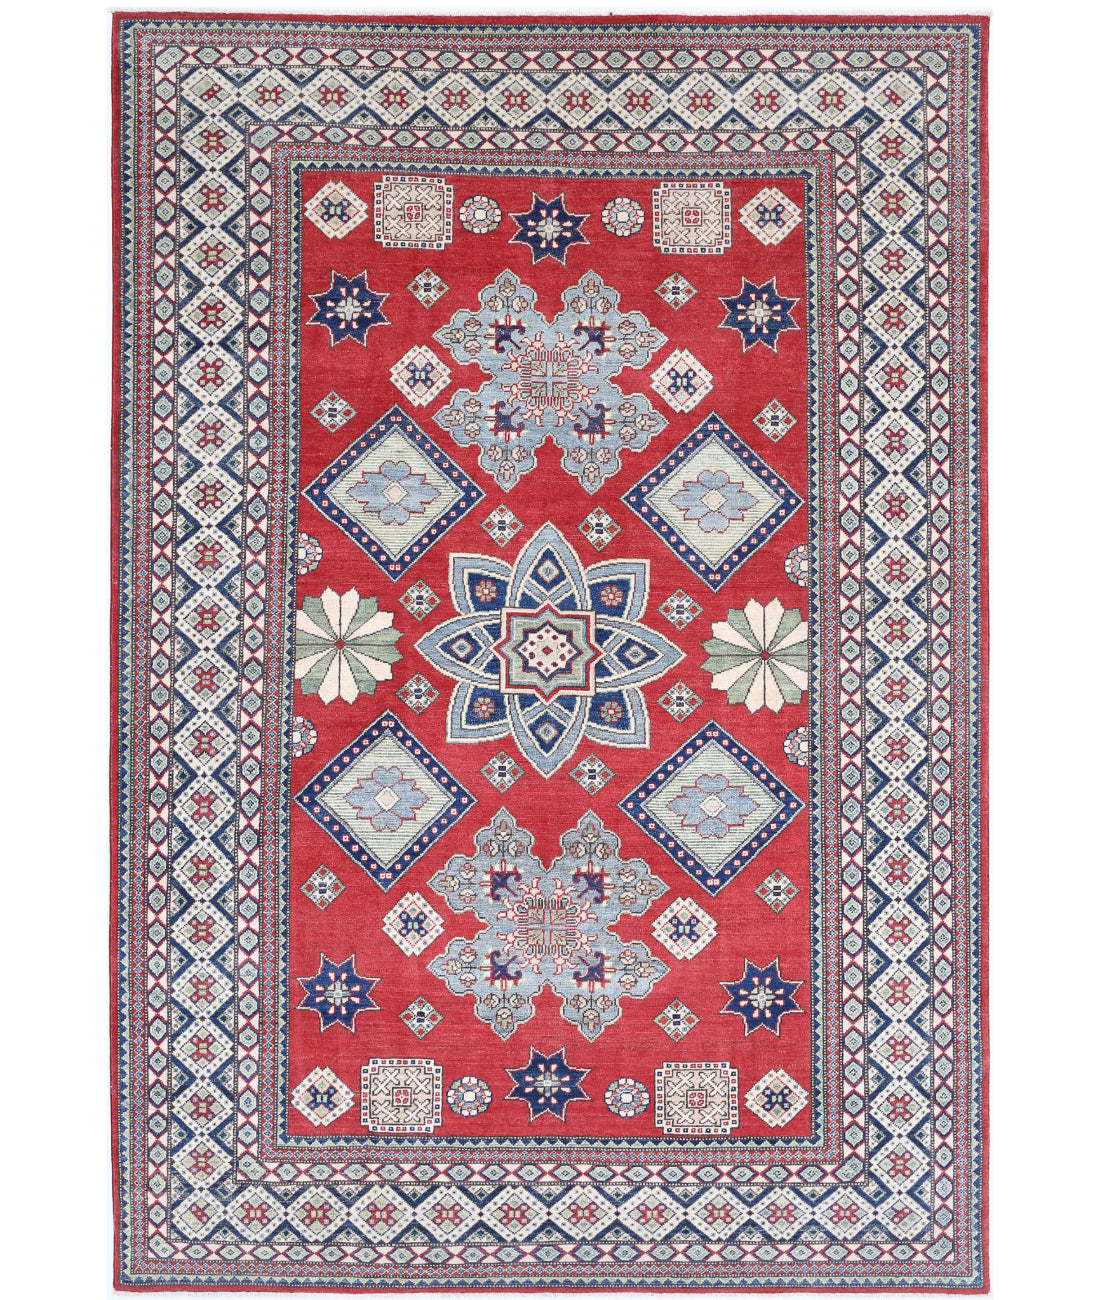 Hand Knotted Tribal Kazak Wool Rug - 6'8'' x 9'10'' 6'8'' x 9'10'' (200 X 295) / Red / Ivory